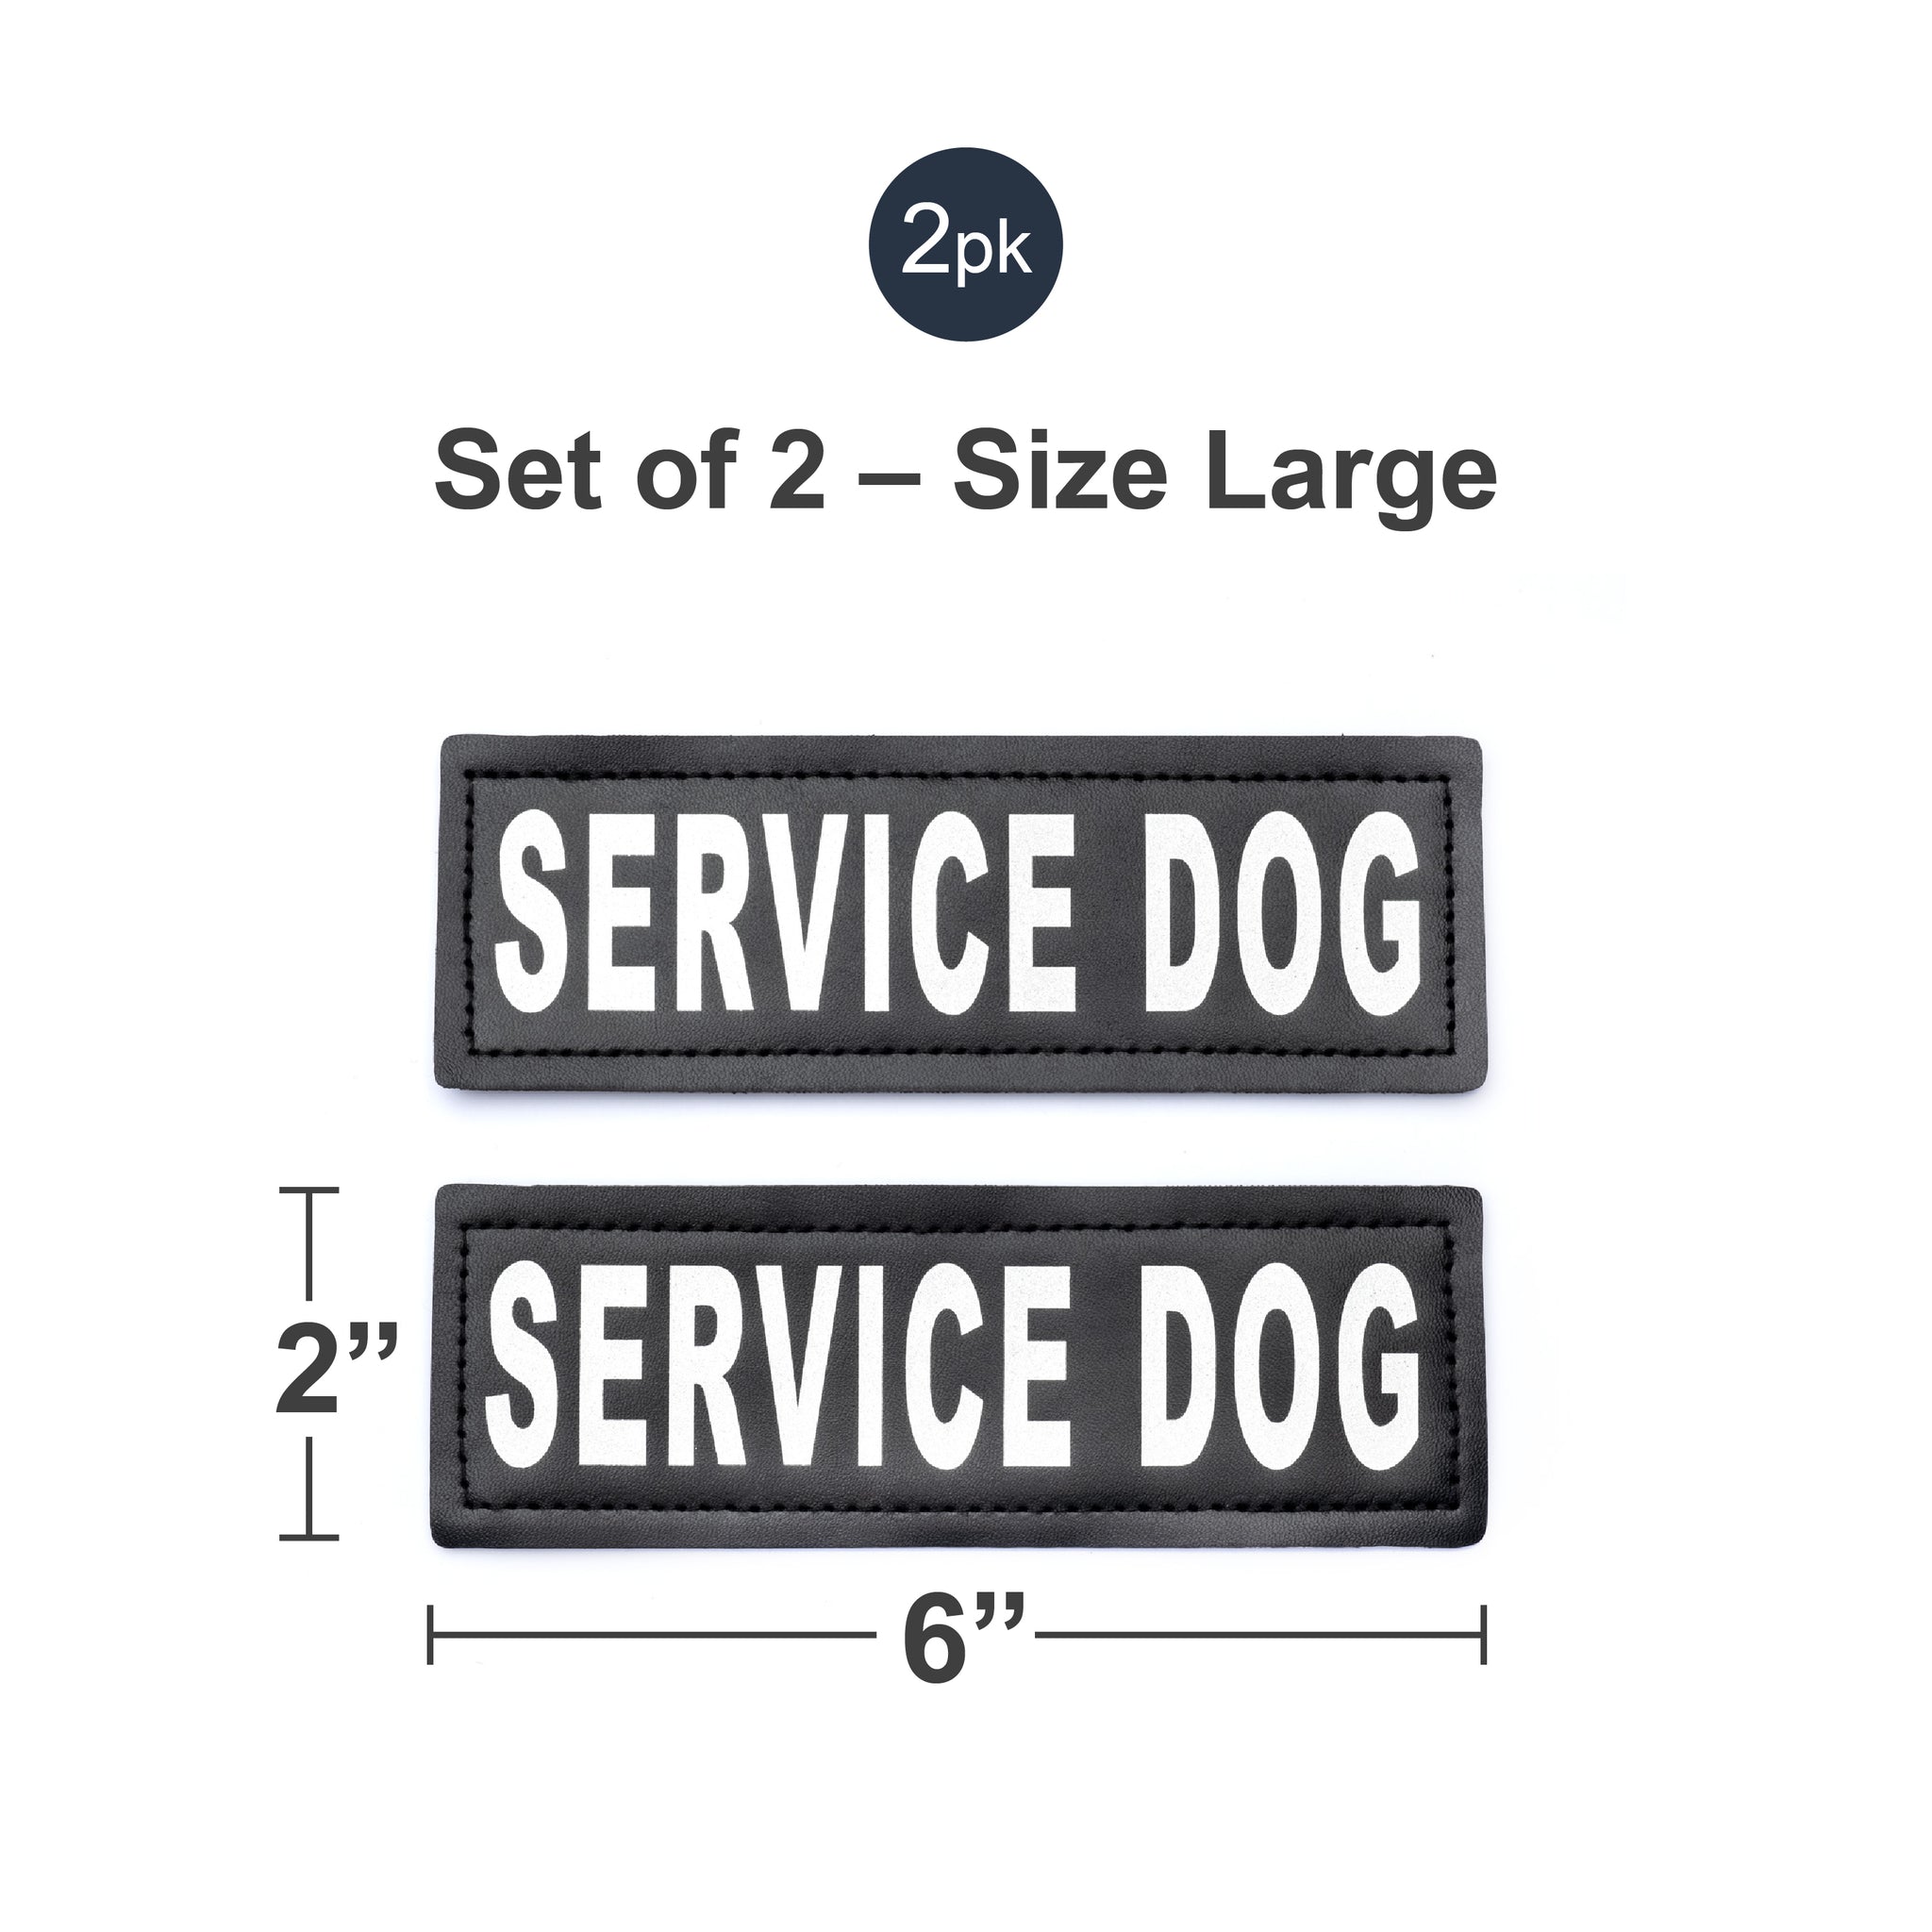 Velcro Patches for Harness - Service Dog, Emotional Support, In